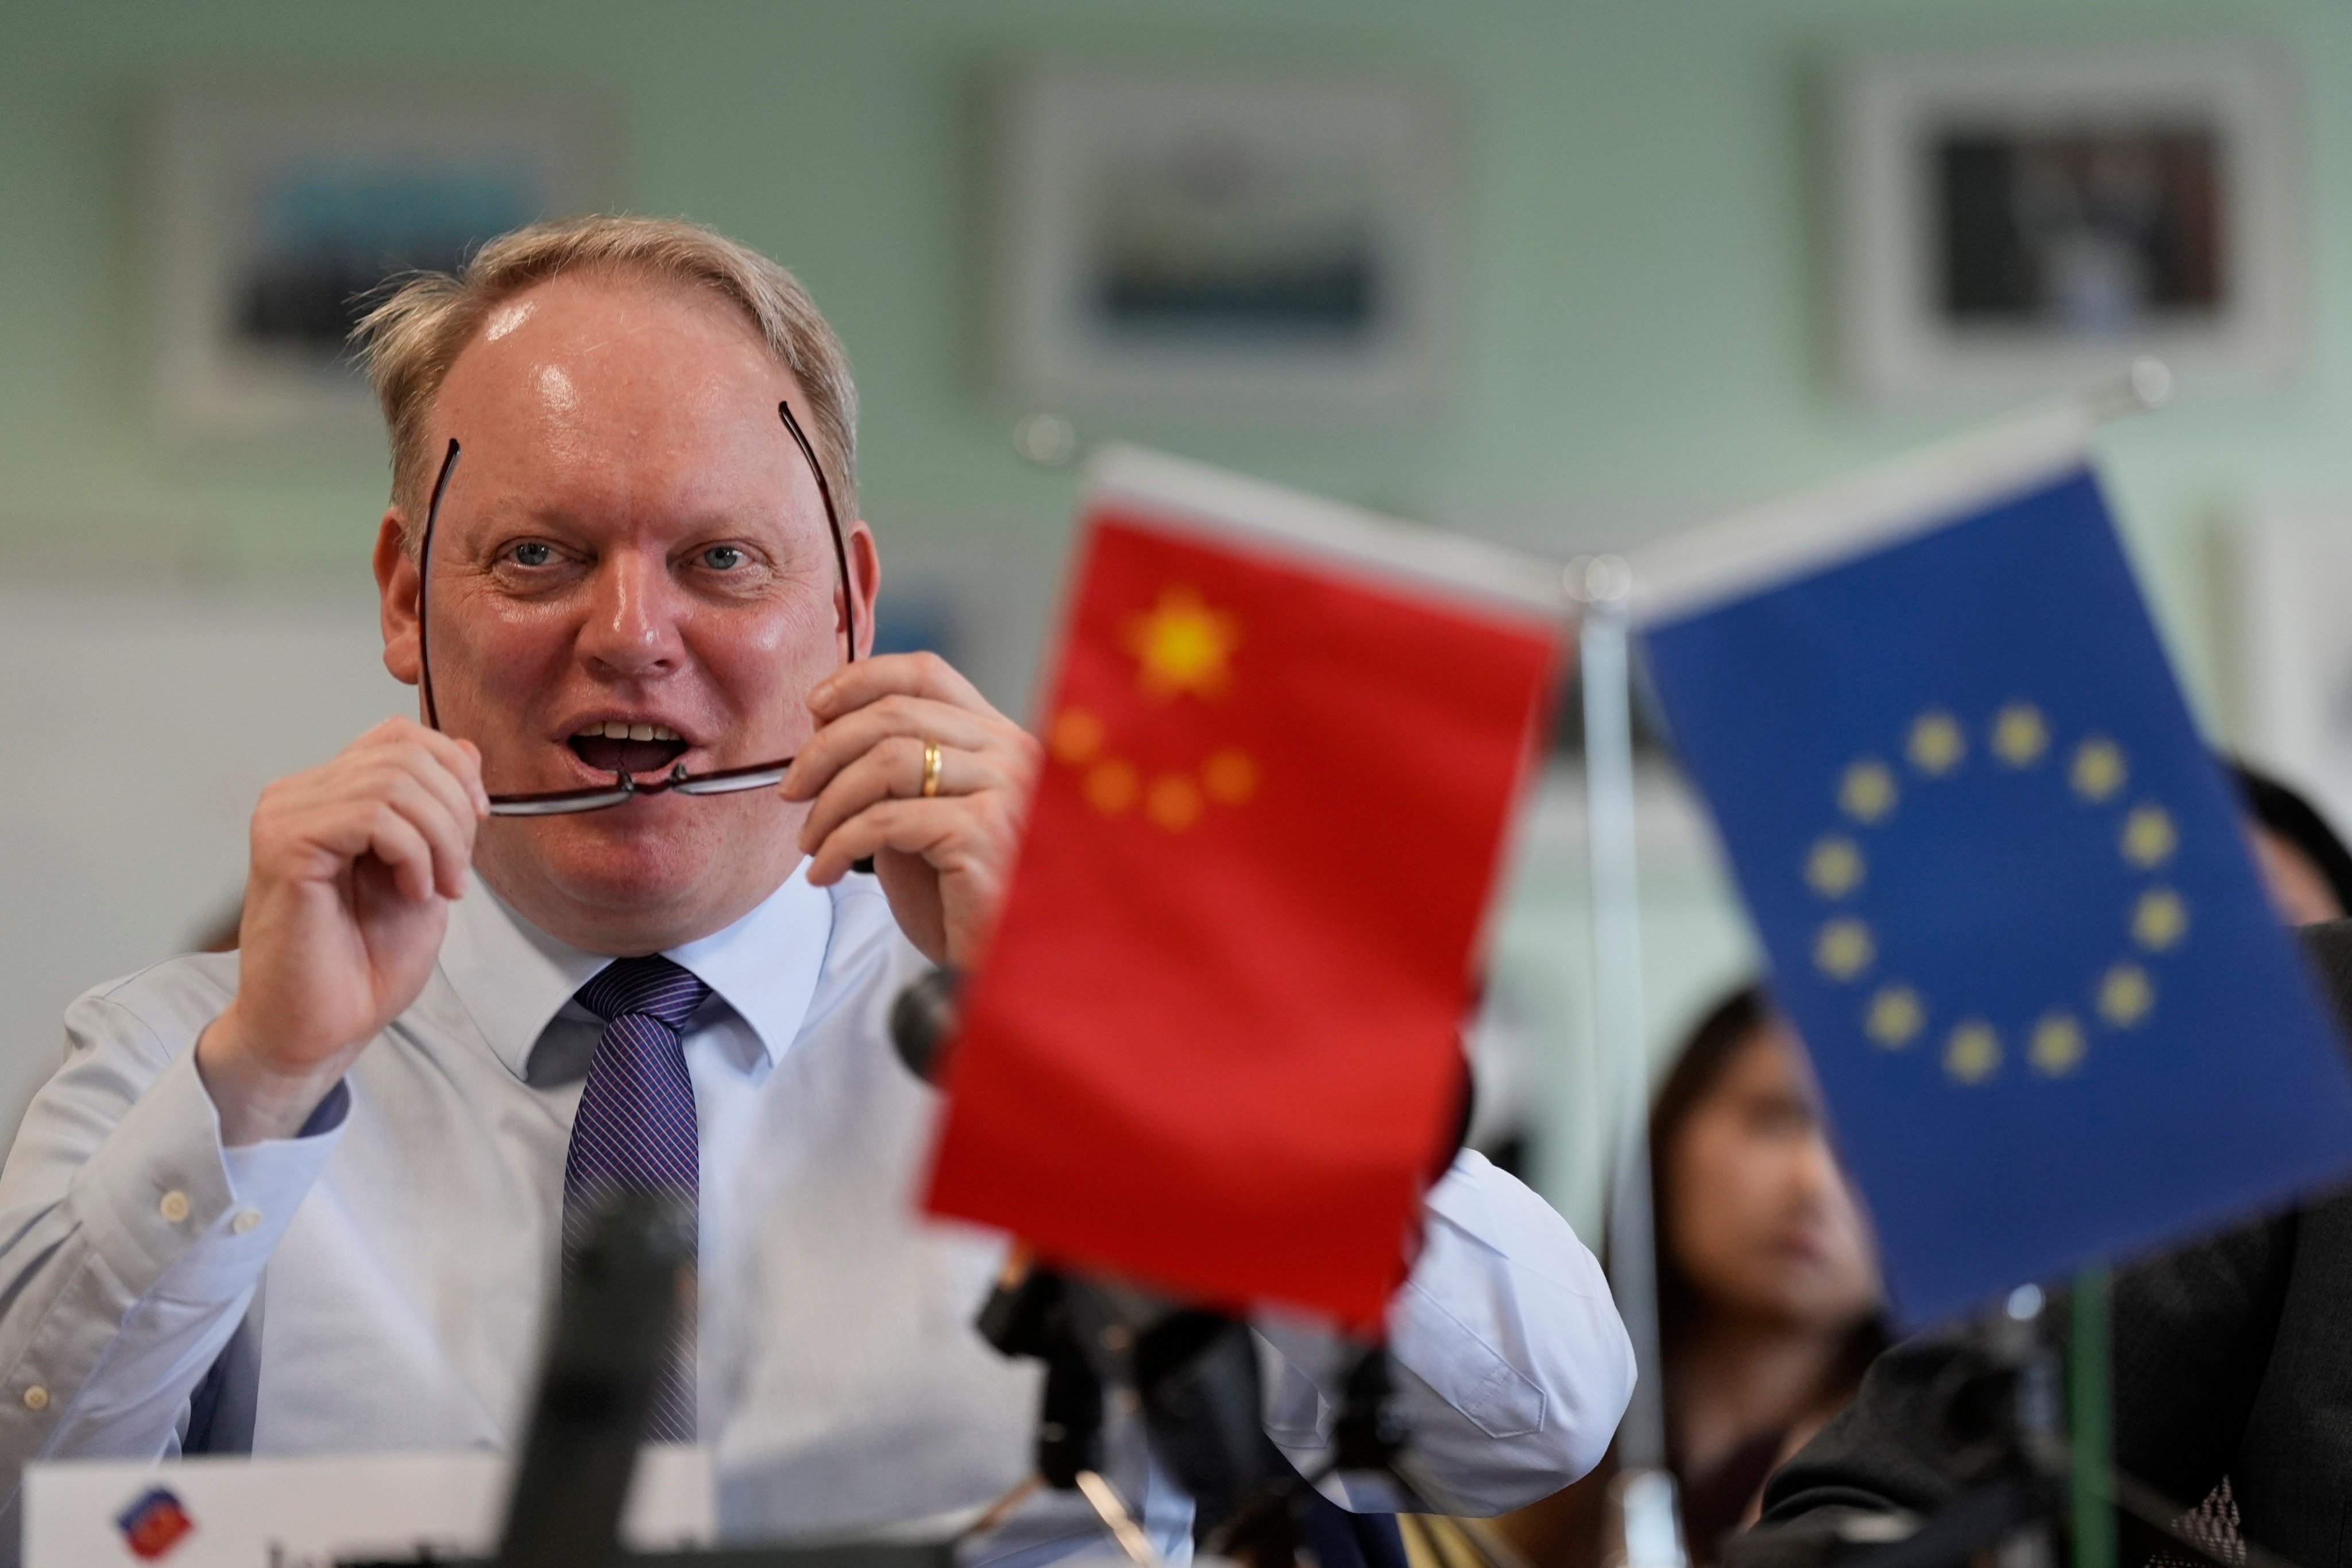 Jens Eskelund, president of the European Union Chamber of Commerce in China, speaks during a press conference in Beijing on May 10. Photo: AP